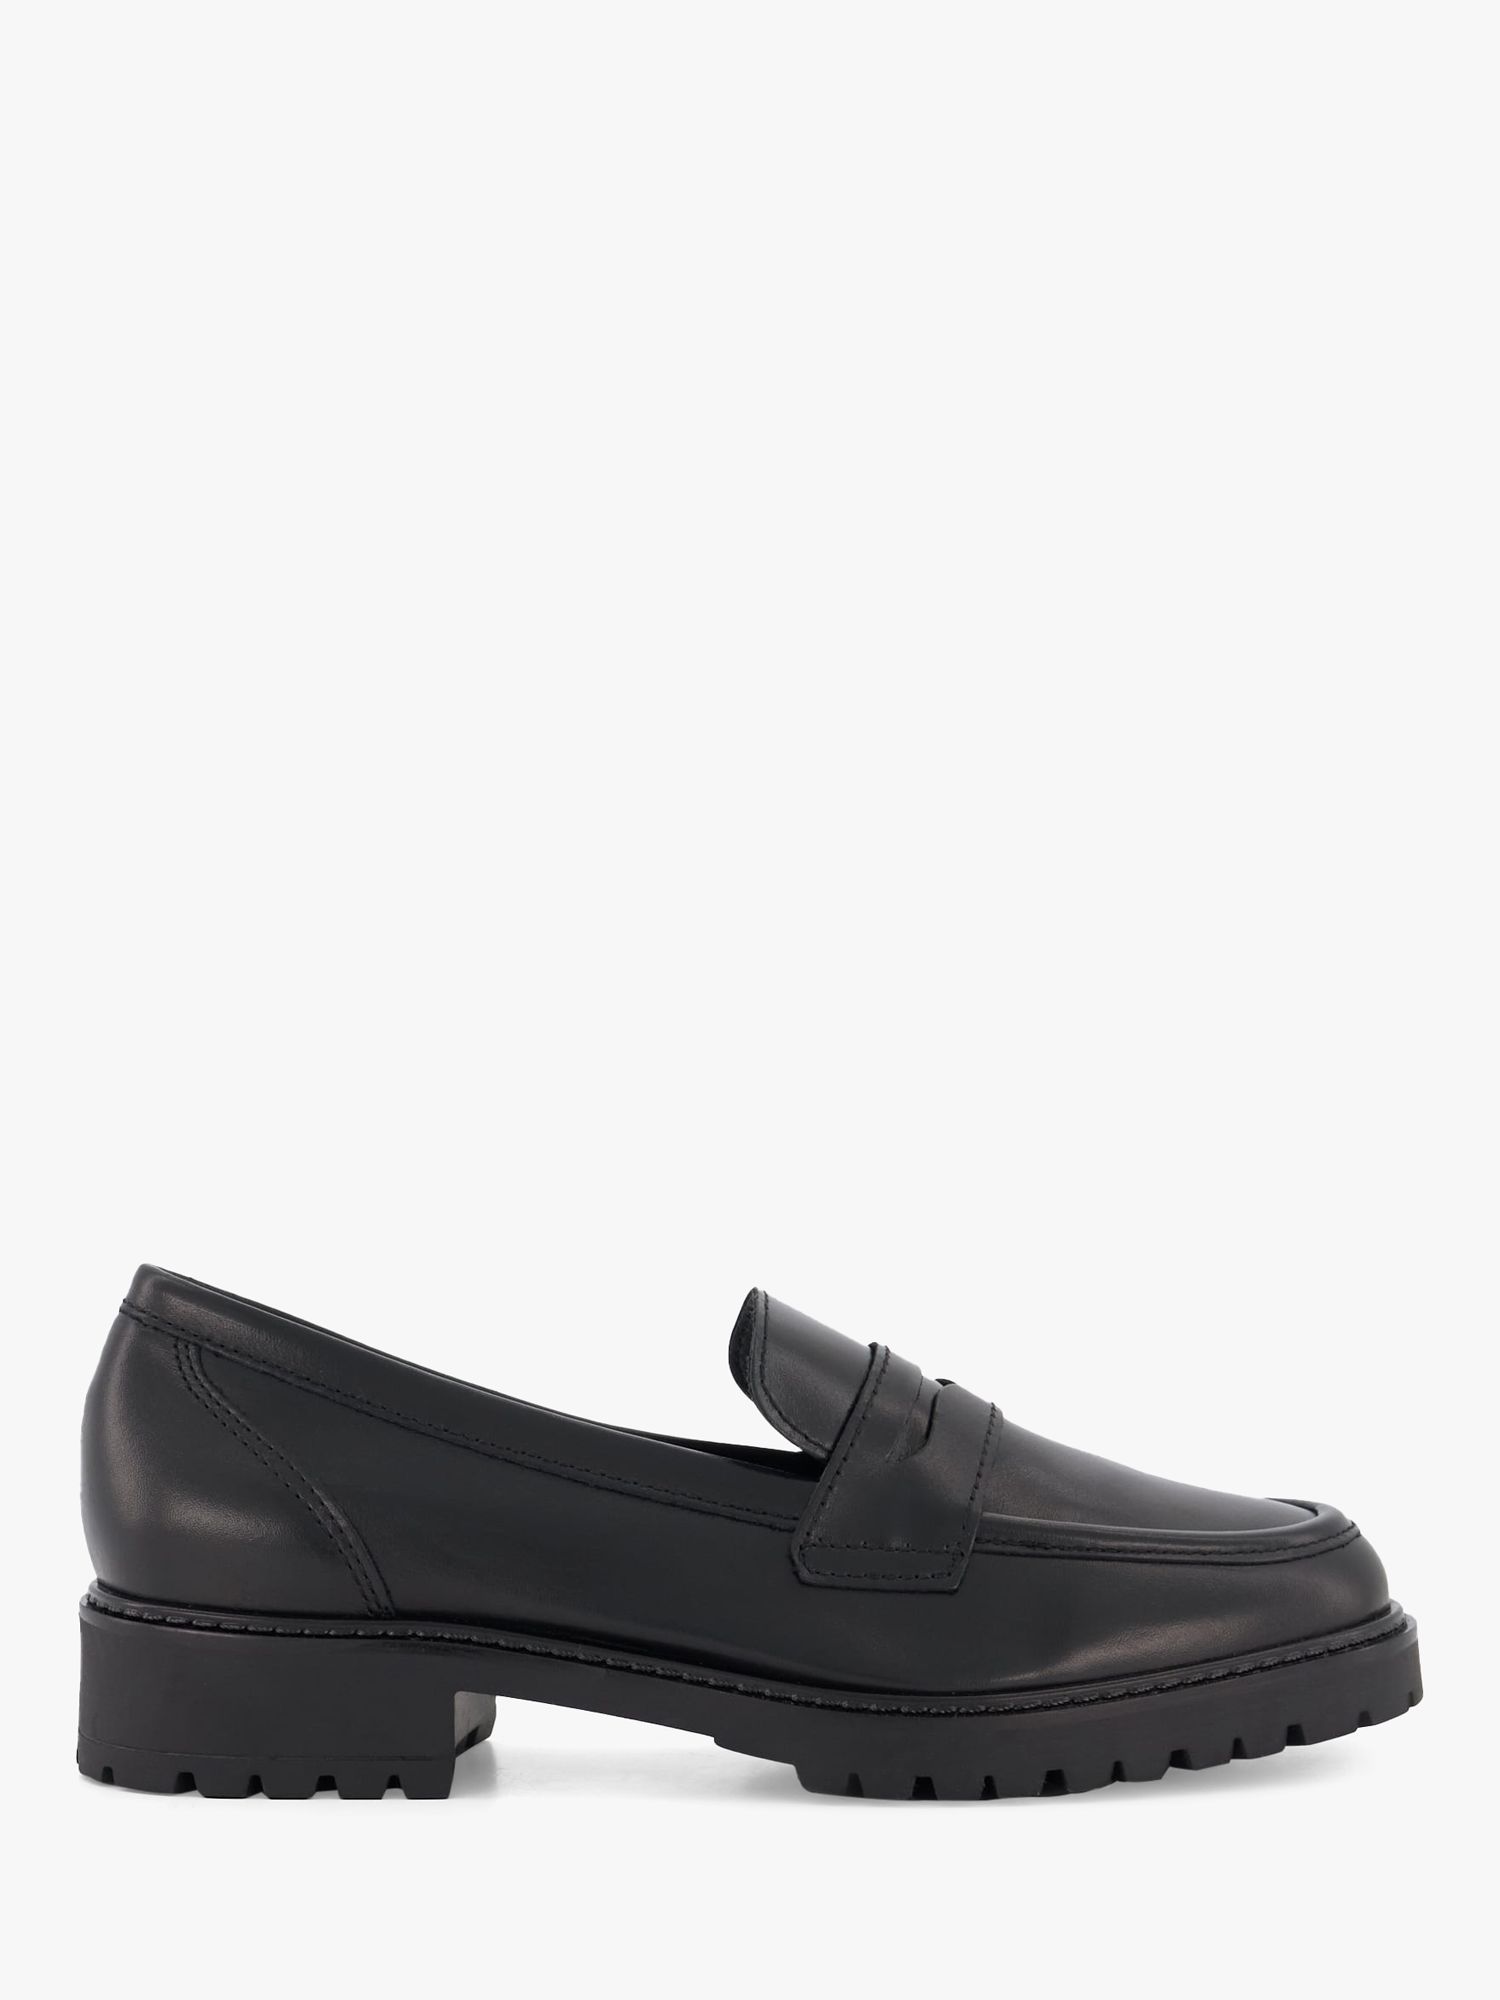 Dune Gild Leather Cleated Penny Loafer, Black-leather at John Lewis ...